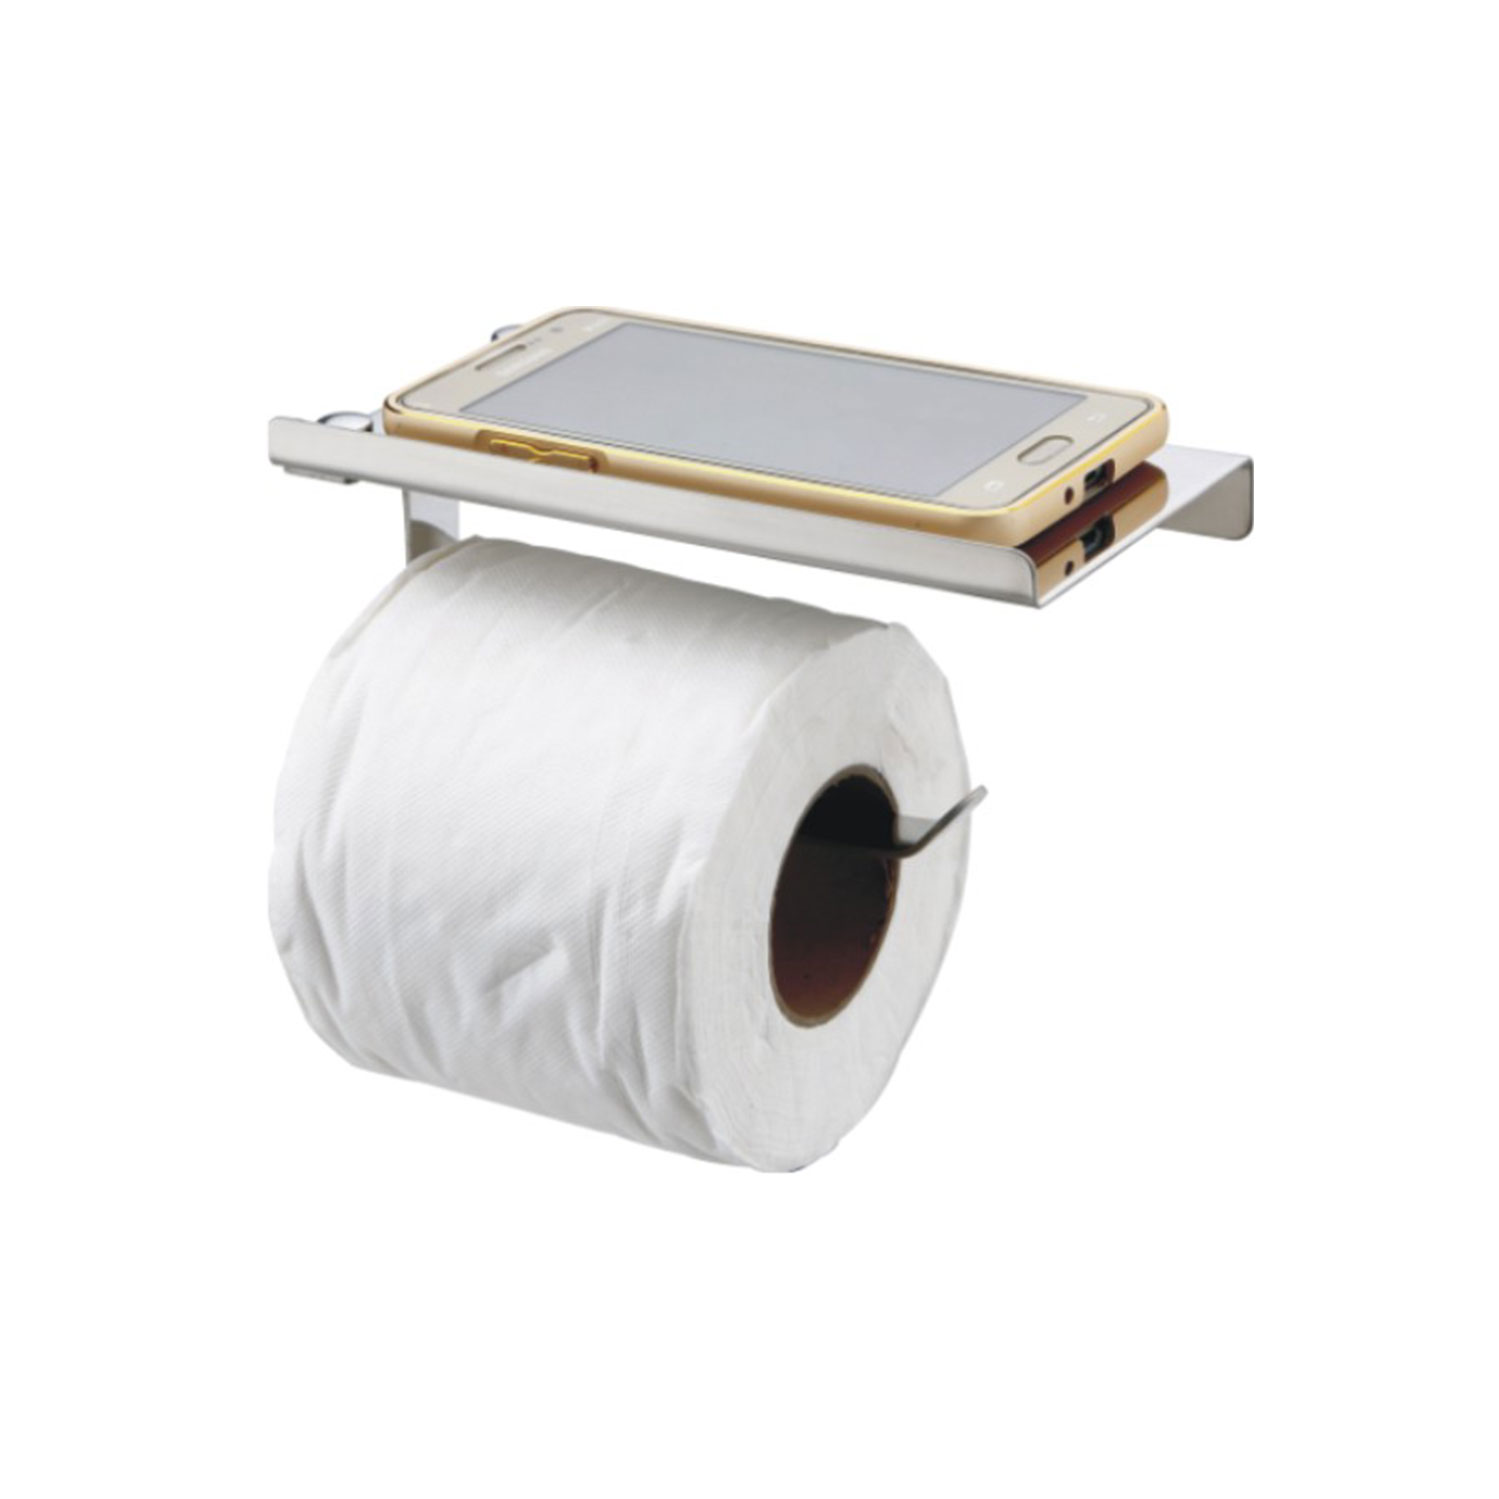 C.P Paper Holder with Phone Stand (SS 304)